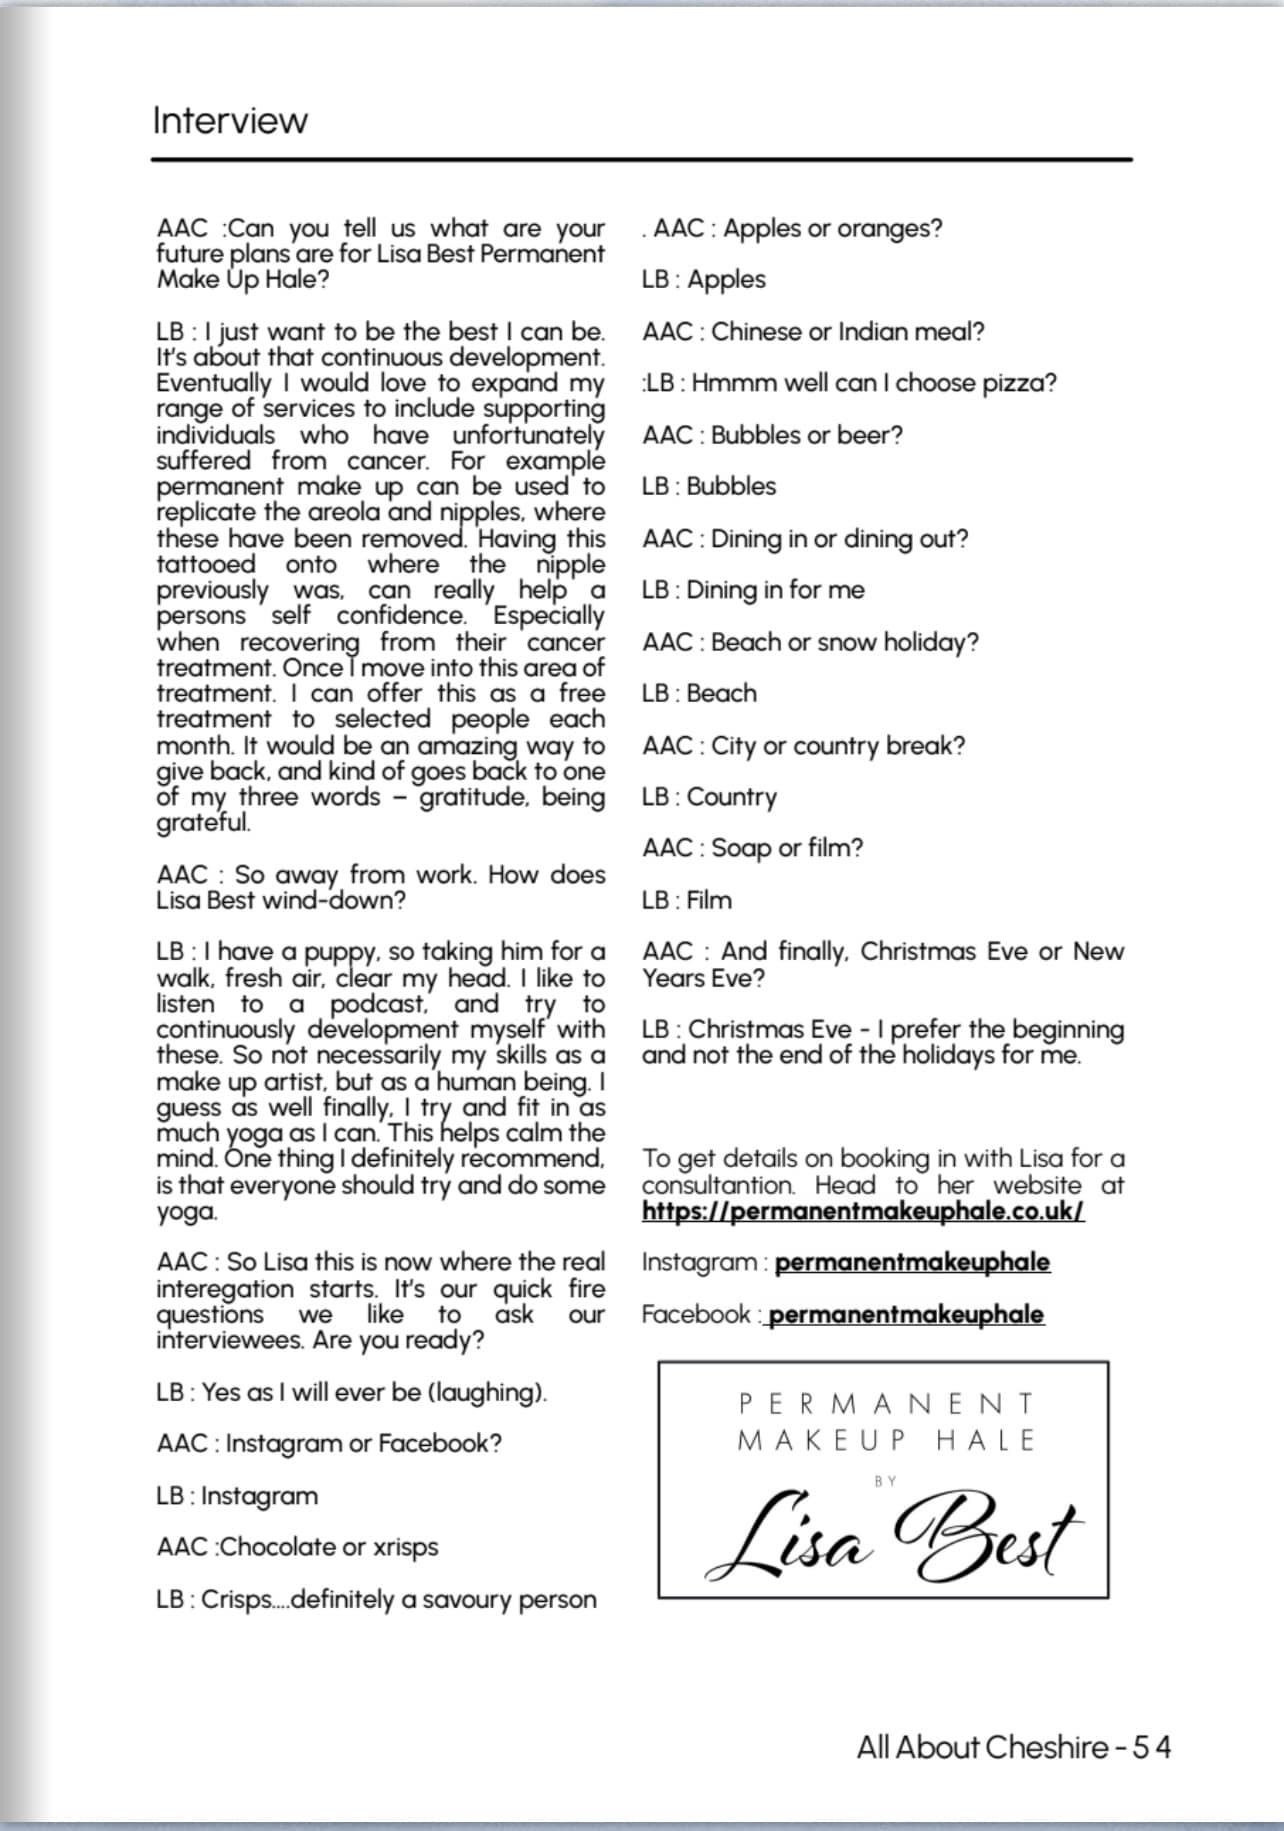 Cheshire Magazine 4th page transcribe of interview with Lisa Best.